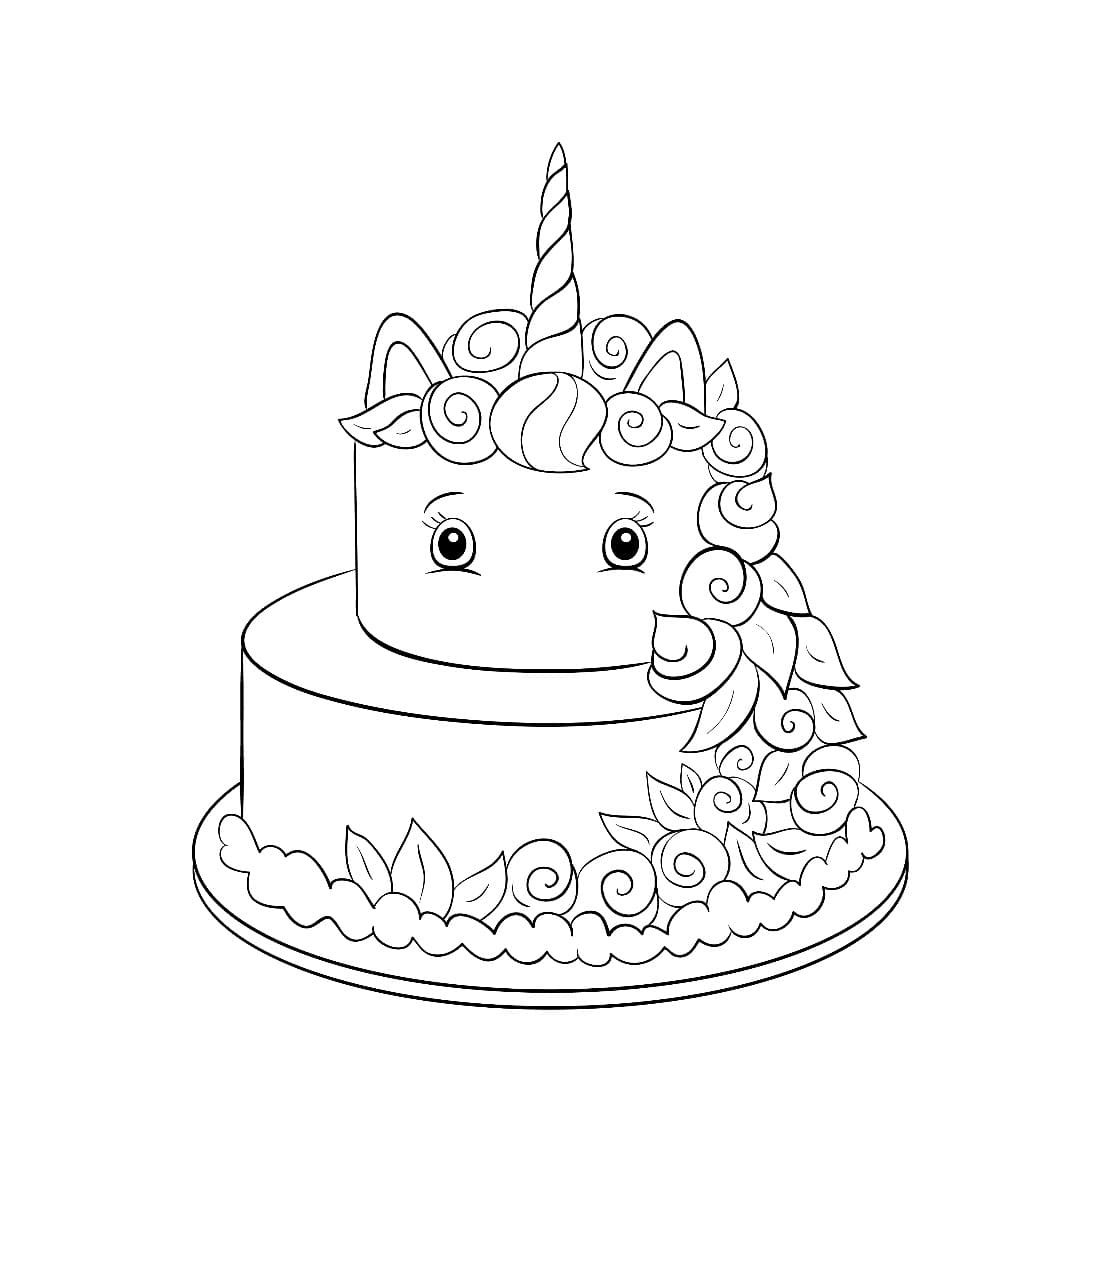 Cake Coloring Pages  110 images for Kids Free Printable